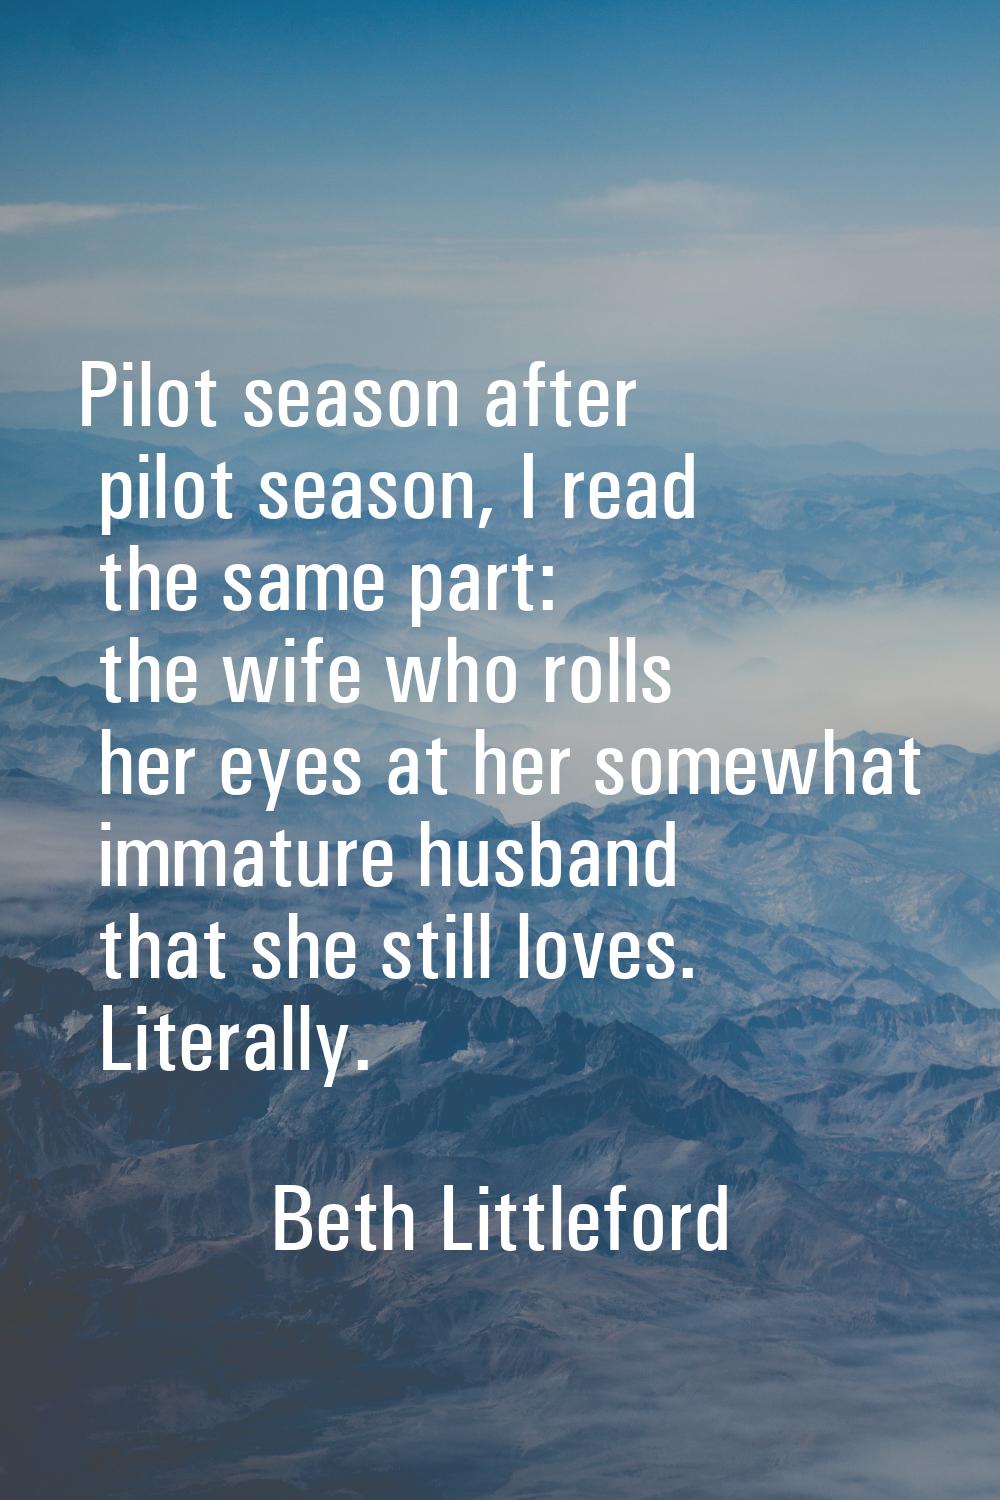 Pilot season after pilot season, I read the same part: the wife who rolls her eyes at her somewhat 